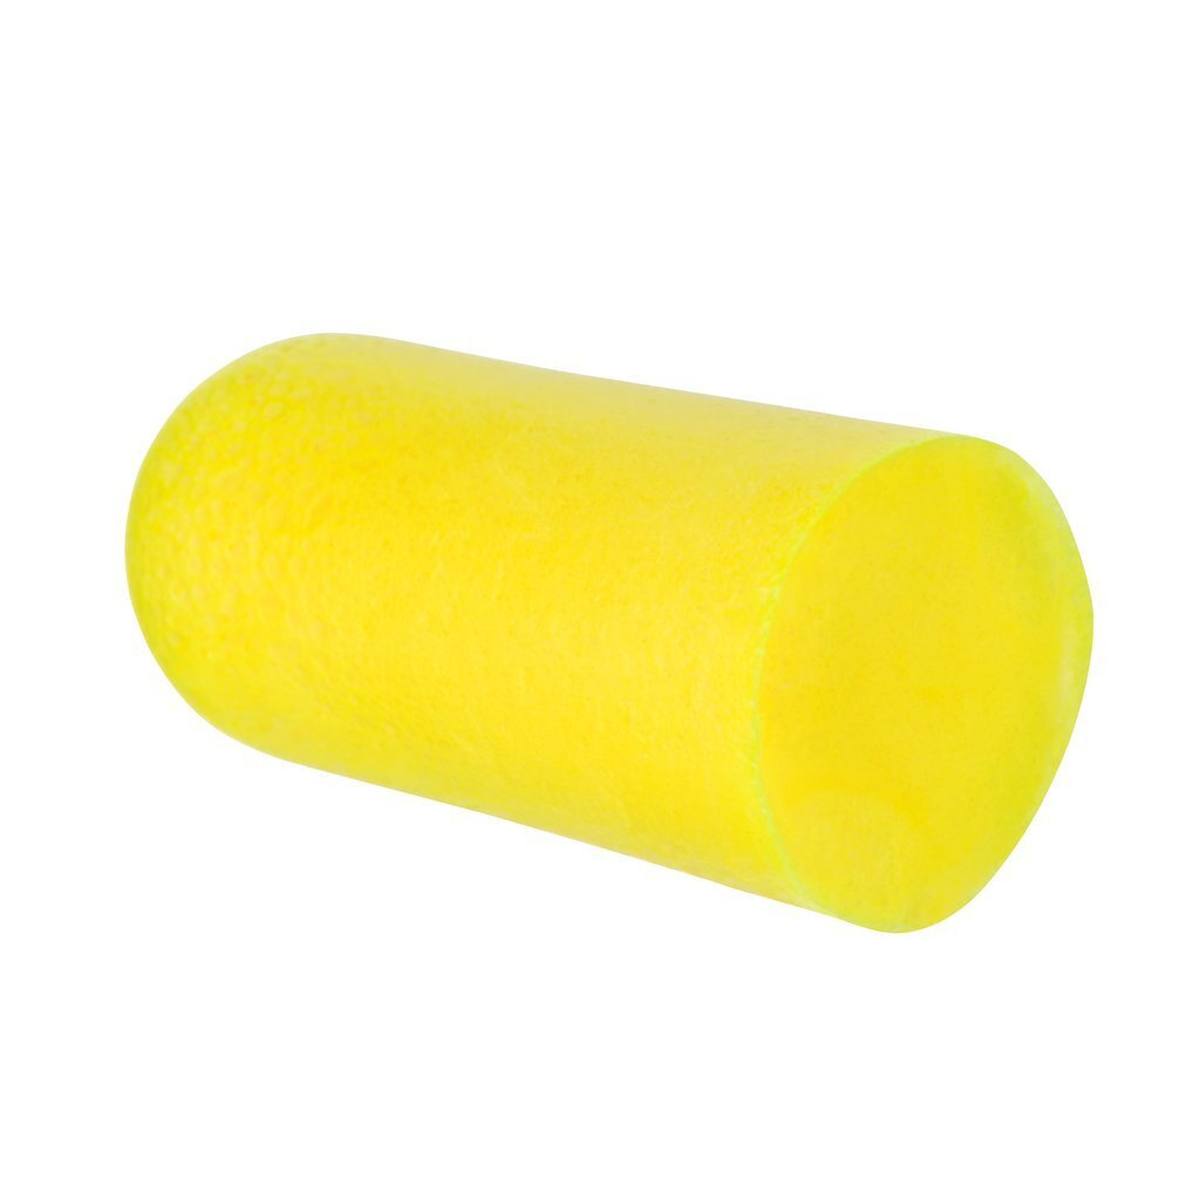 3M E-A-R Soft Yellow Neon Refill Bag (for filling the refill attachment) for OneTouch Pro Dispenser, SNR=36 dB PD01010